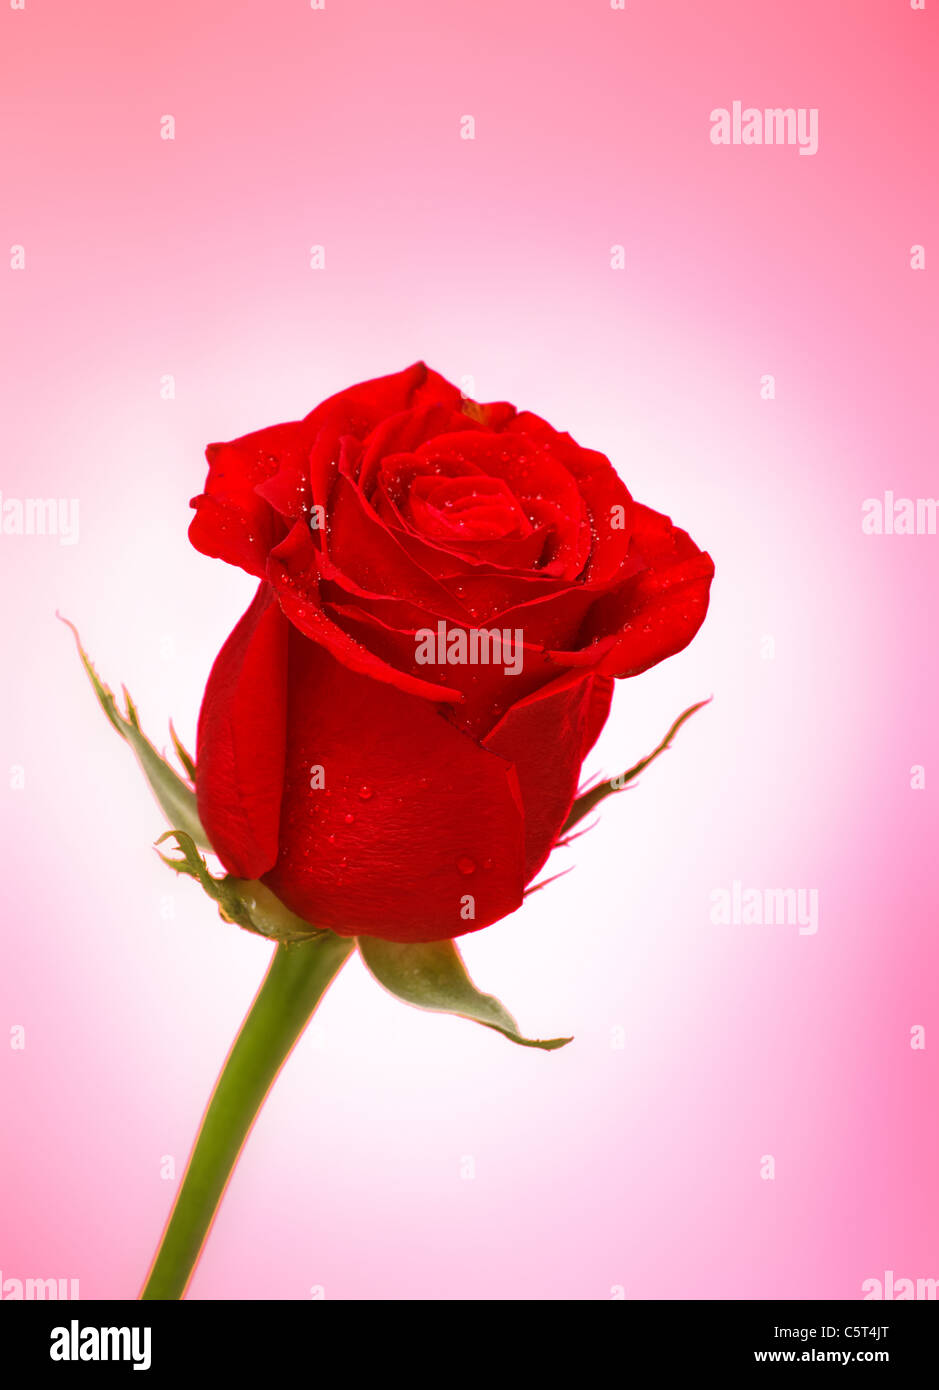 single bright red rose over pink background Stock Photo